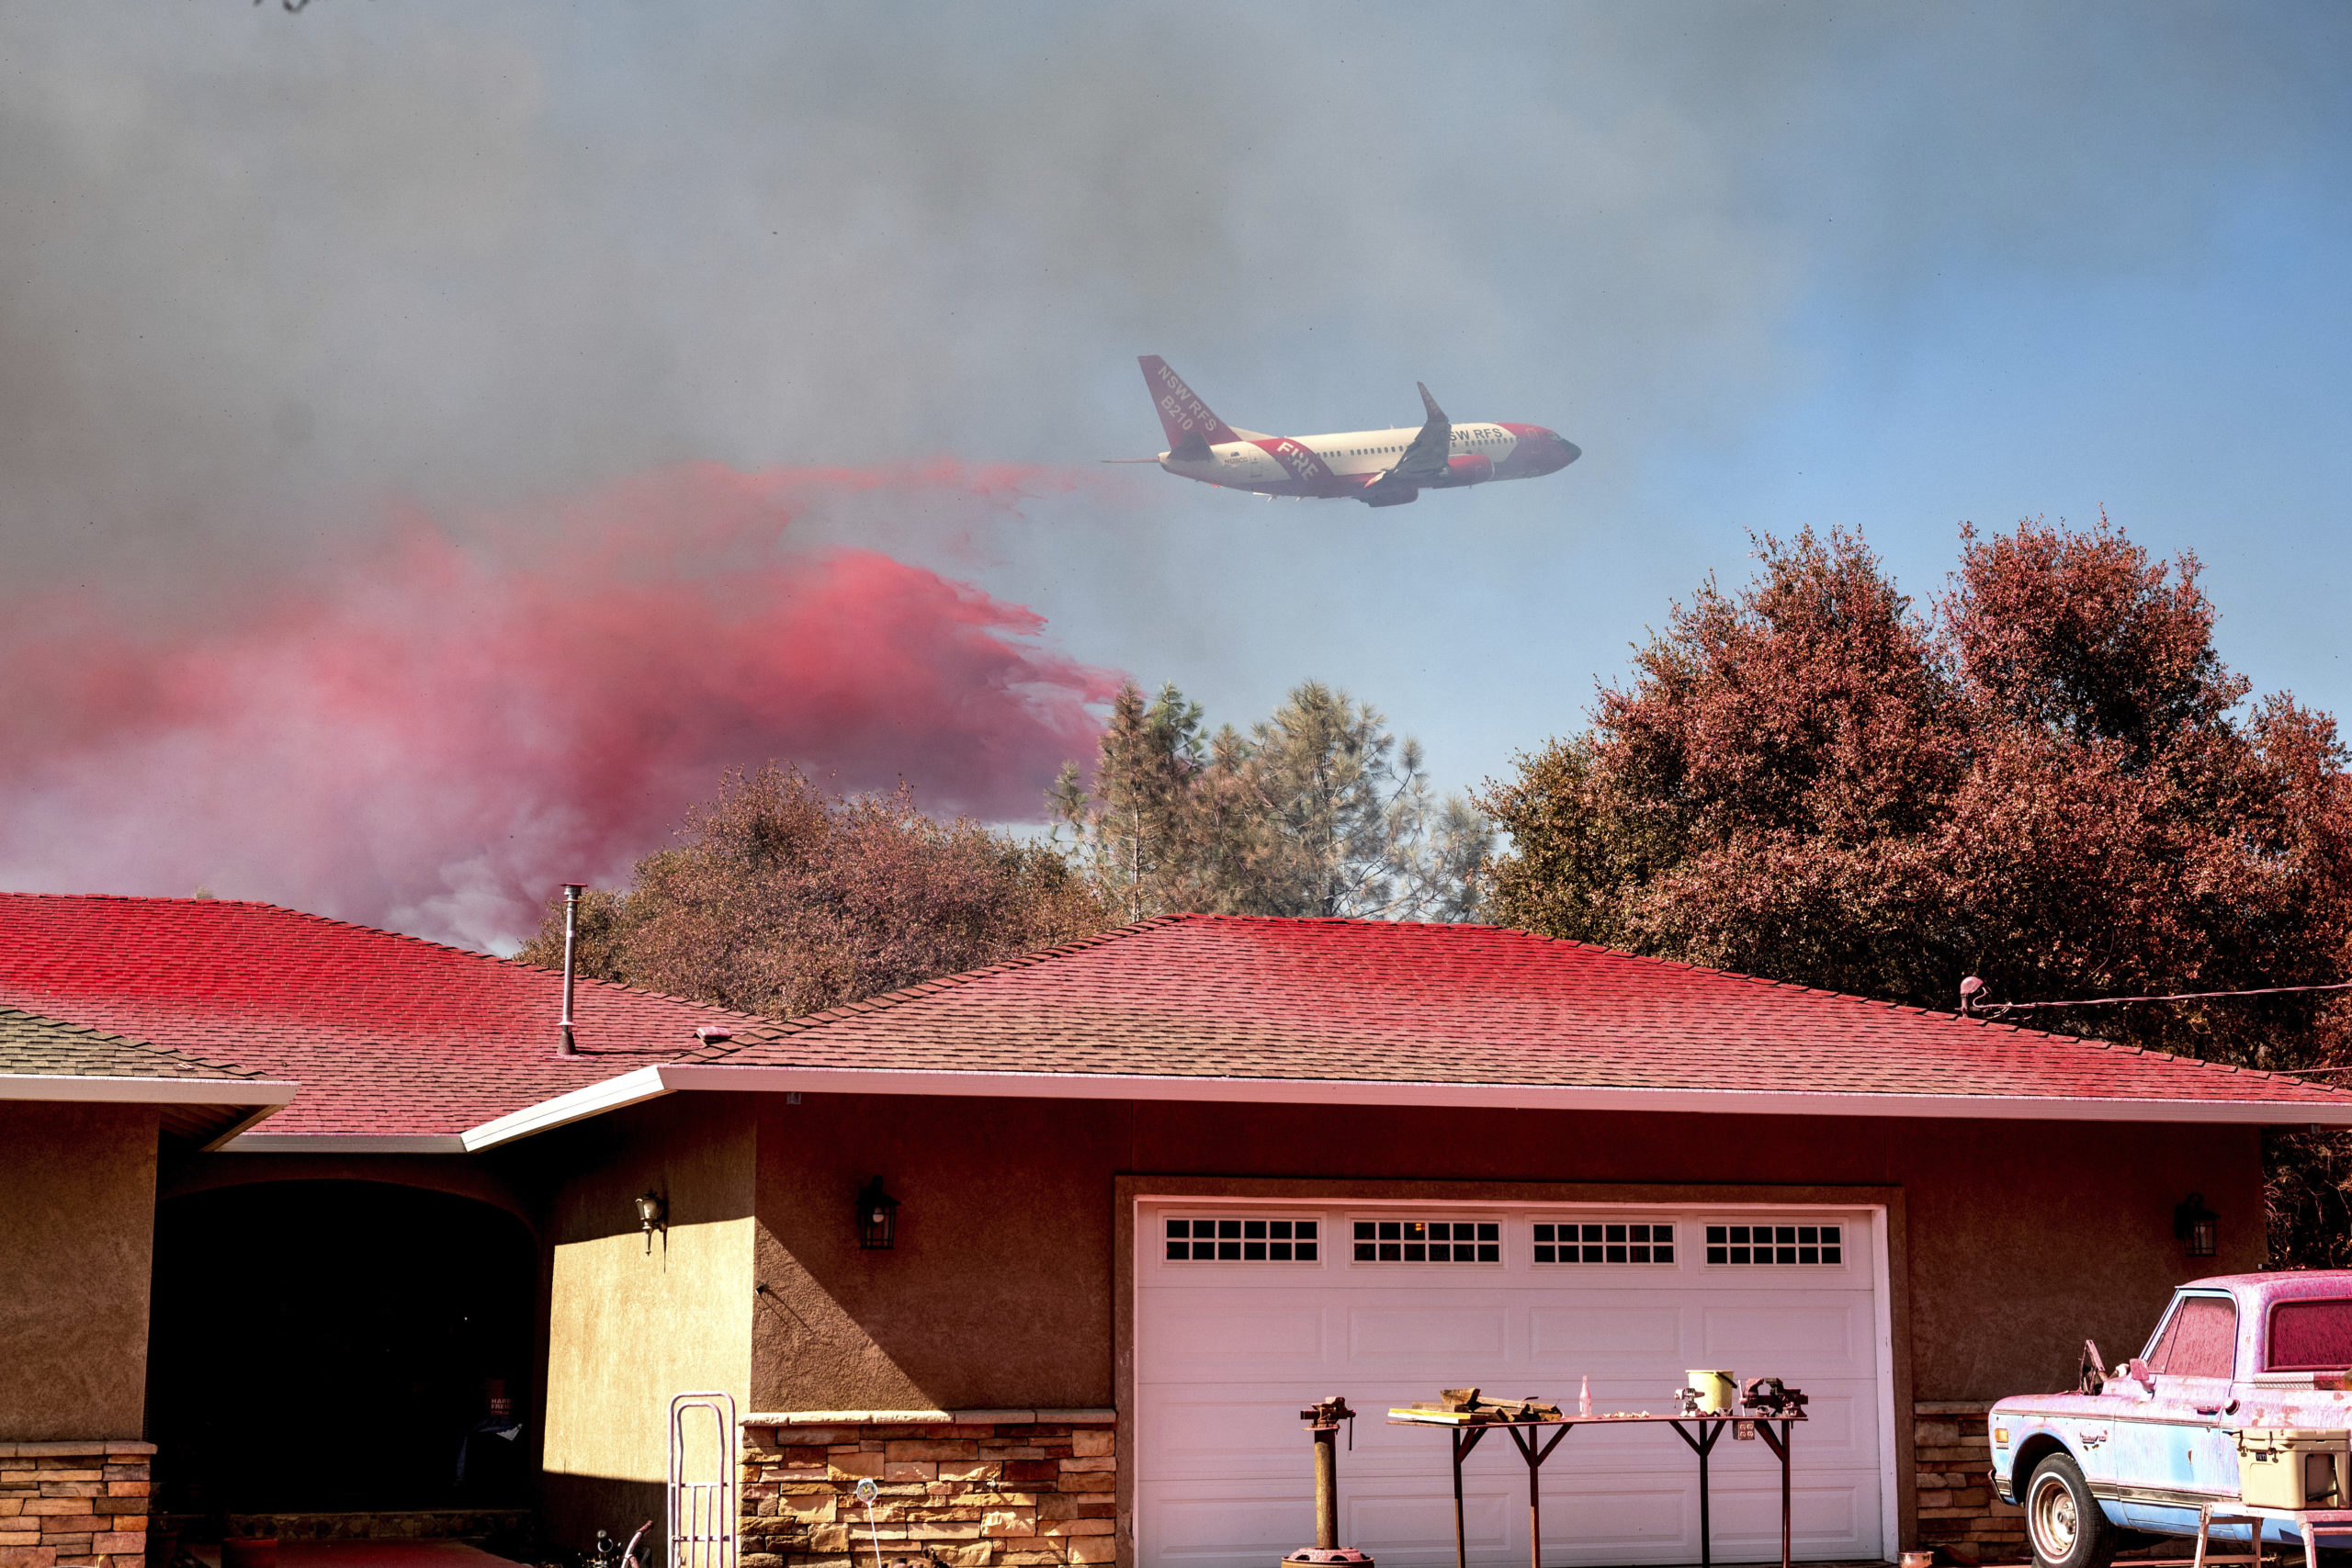 Evacuations Ordered as California Wildfire Spreads, Cause Still Under Investigation